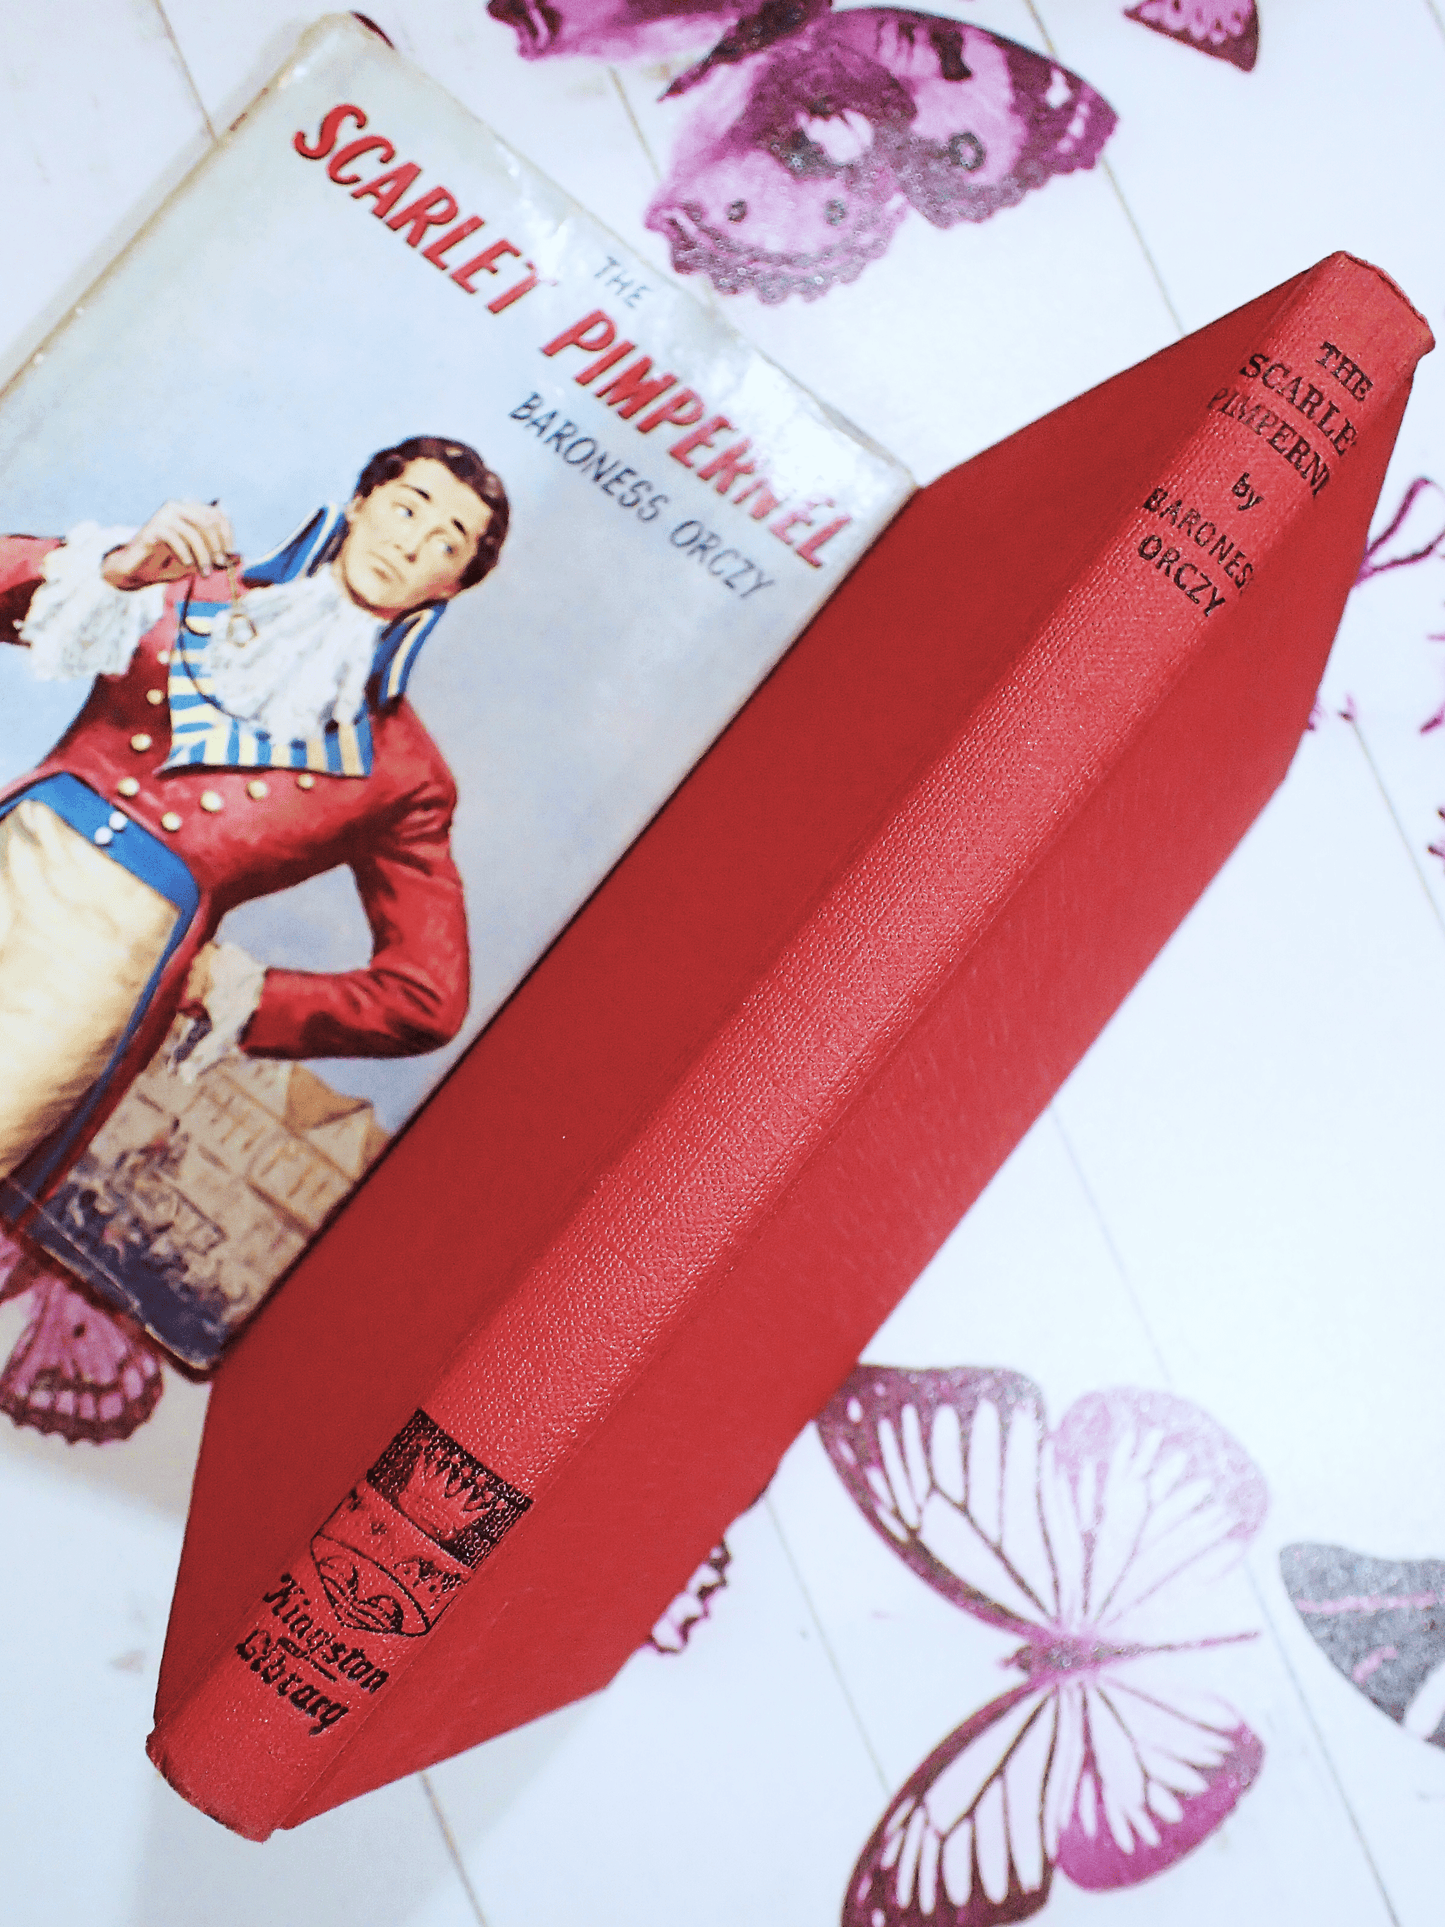 Spine of The Scarlet Pimpernel by Baroness Orczy Thrilling Romance Classic 1940's Vintage Book in Red with Black Titles. 